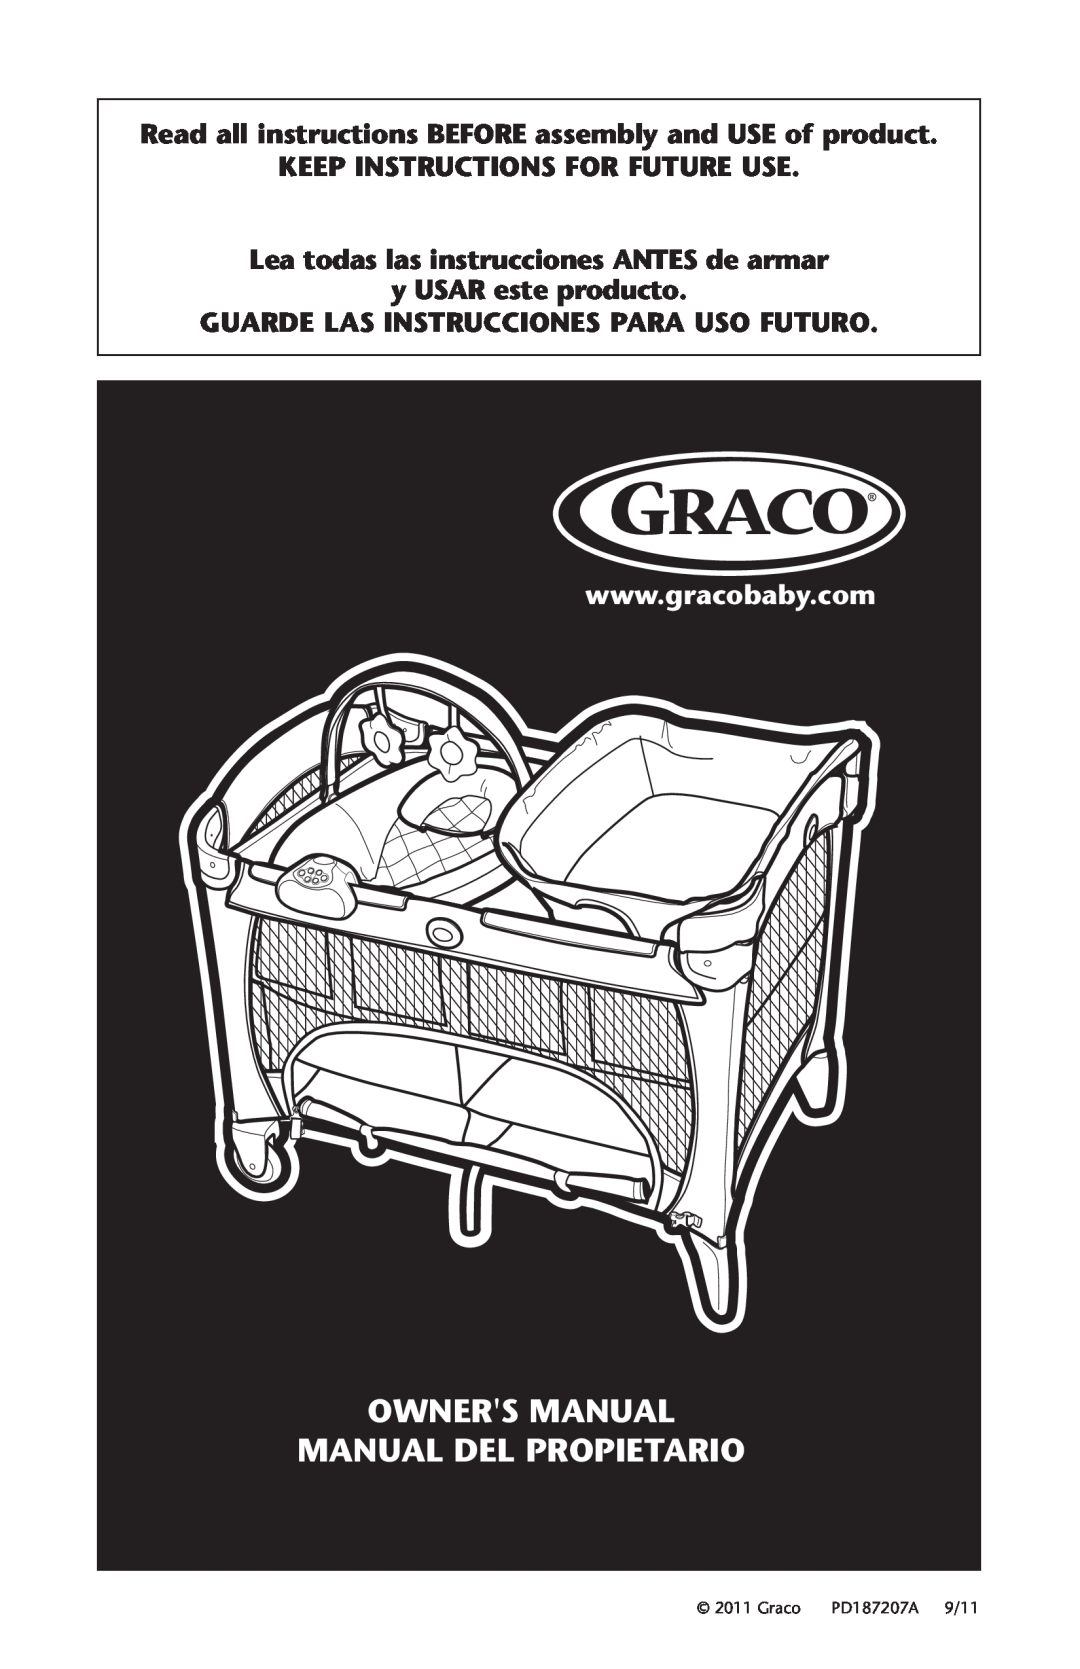 Graco PD187207A 9/11 owner manual Manual Del Propietario, Read all instructions BEFORE assembly and USE of product, Graco 